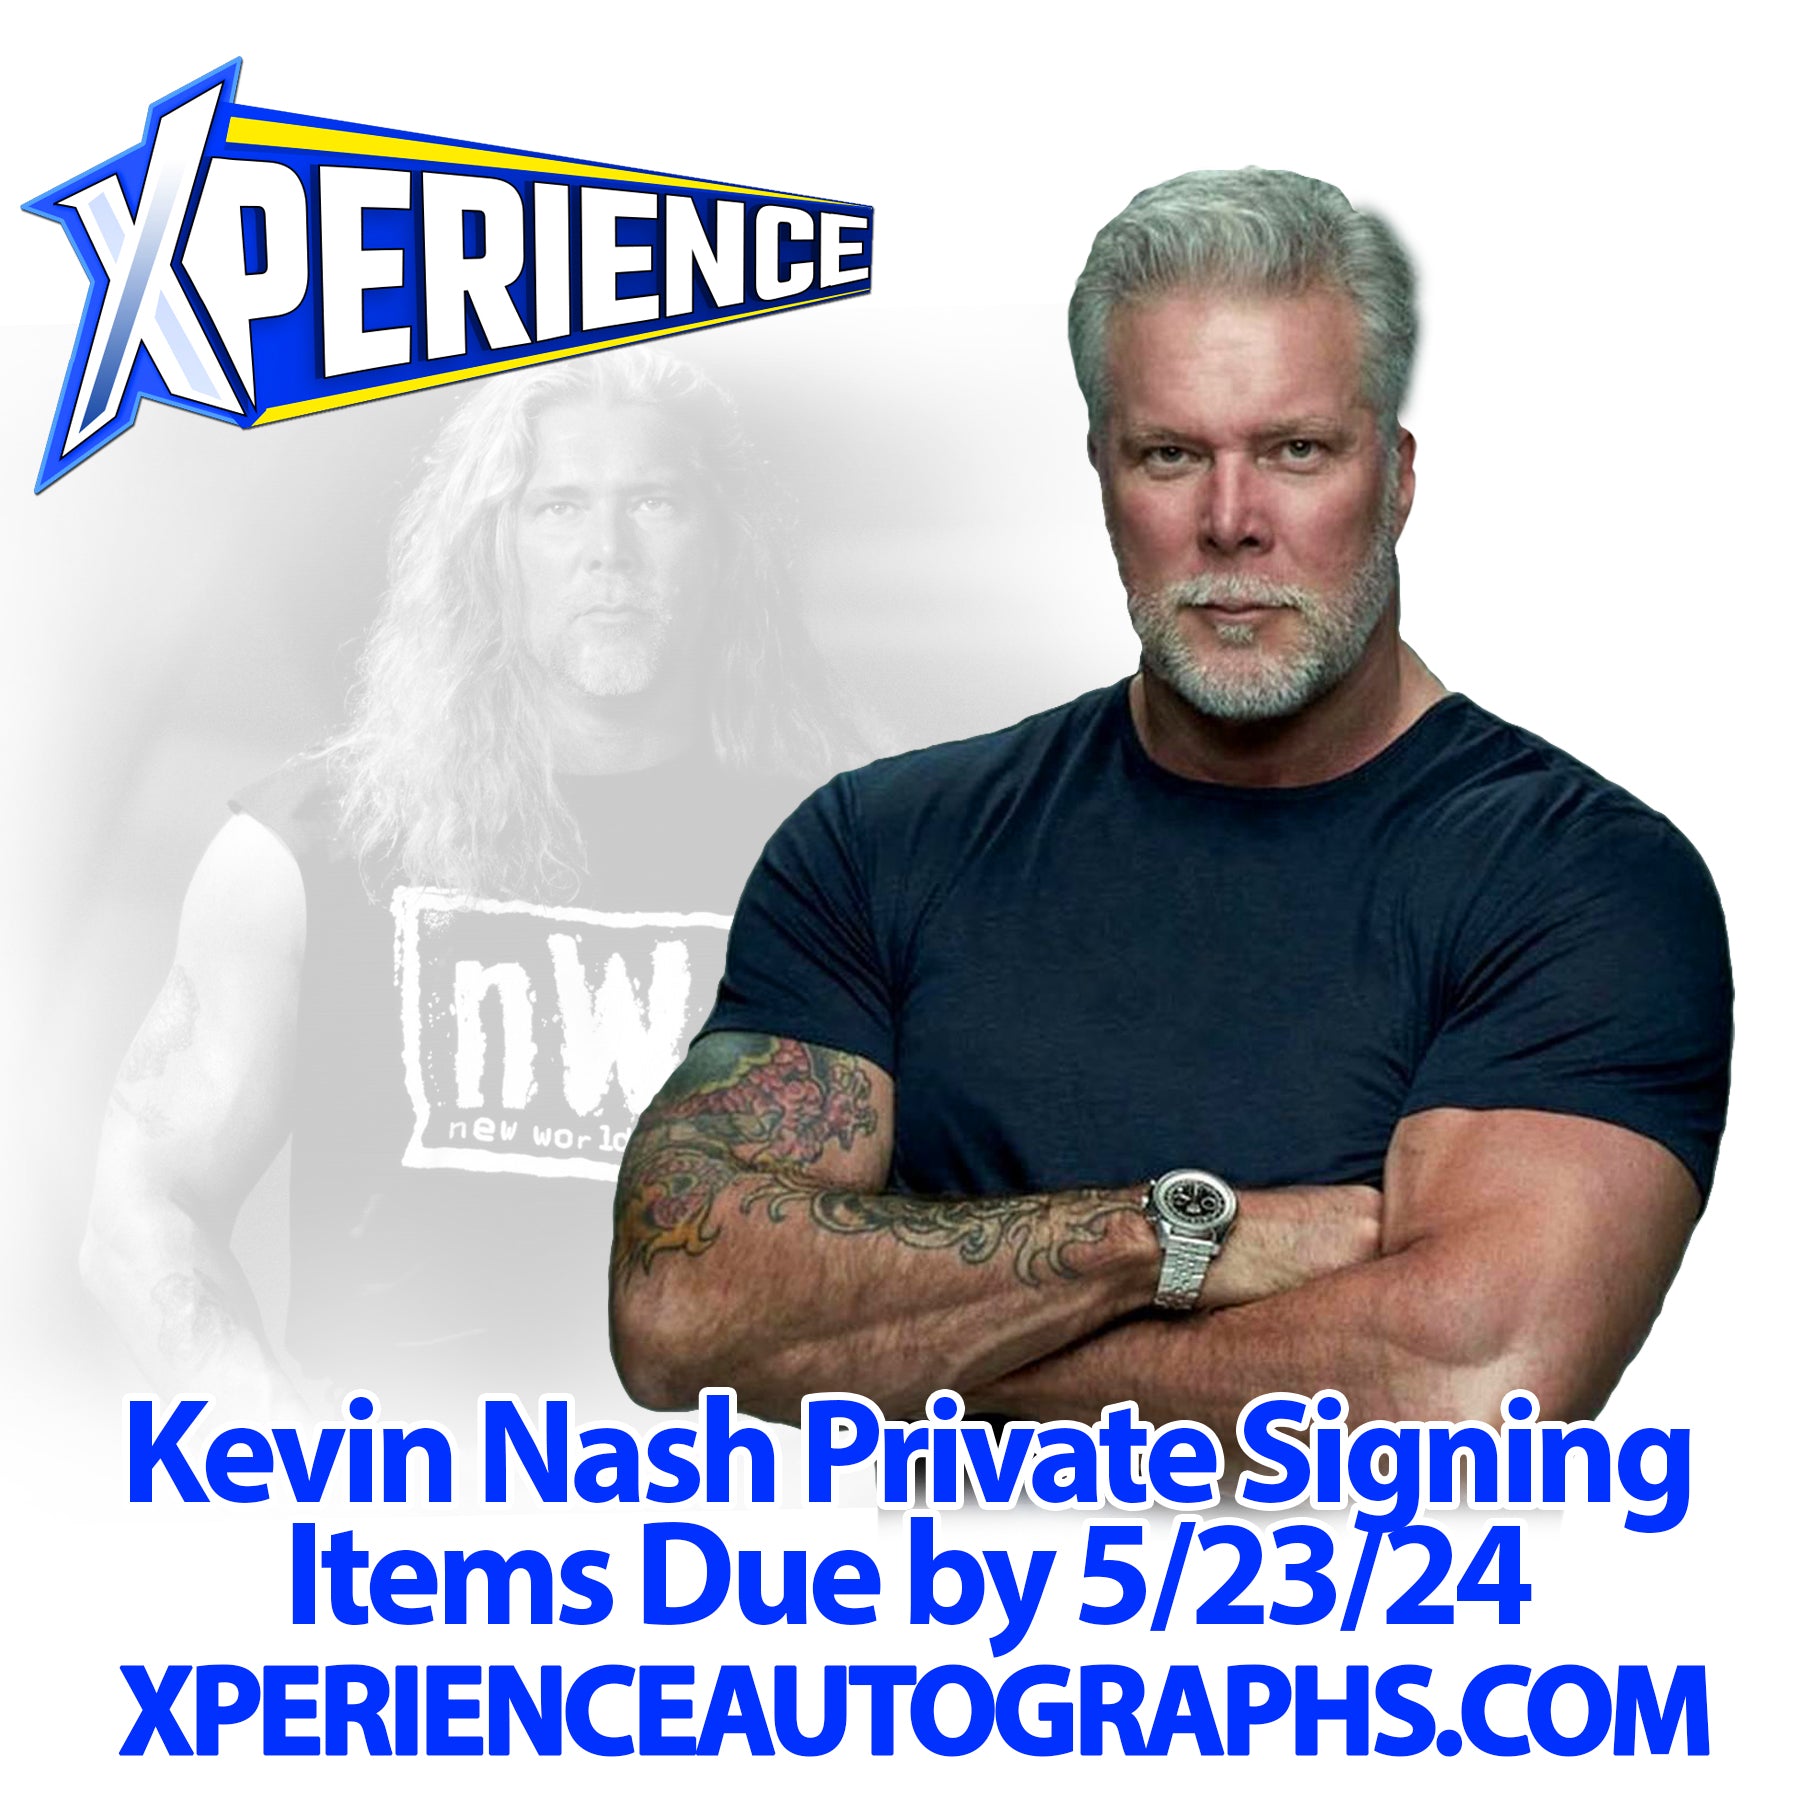 Kevin Nash (Private Signing)